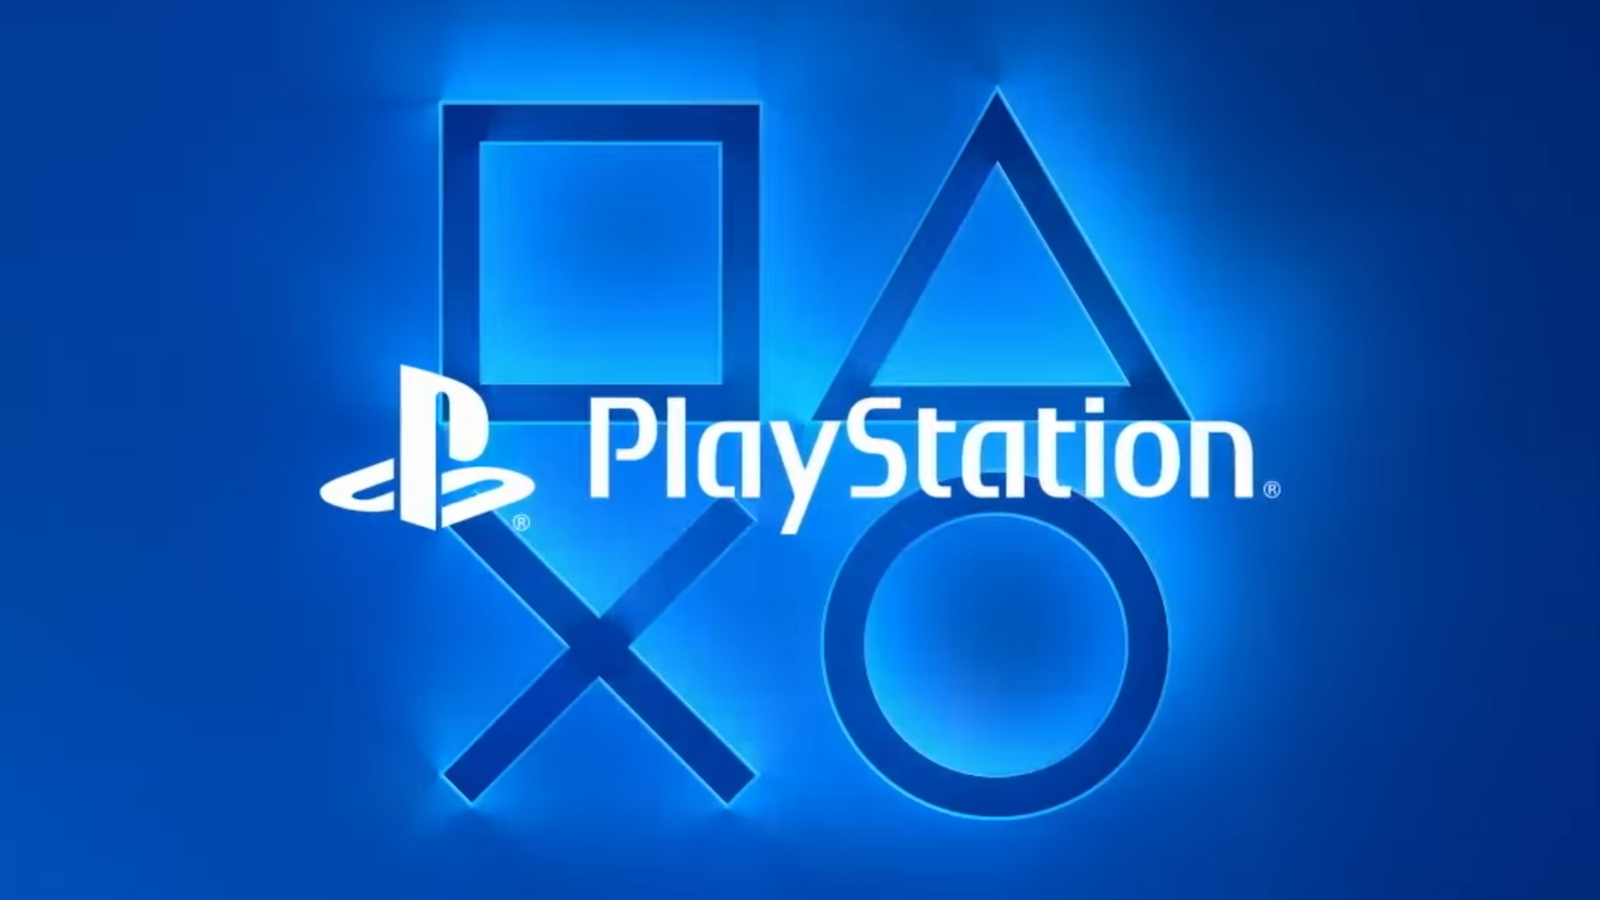 The PlayStation Showcase will be too big for one show. 